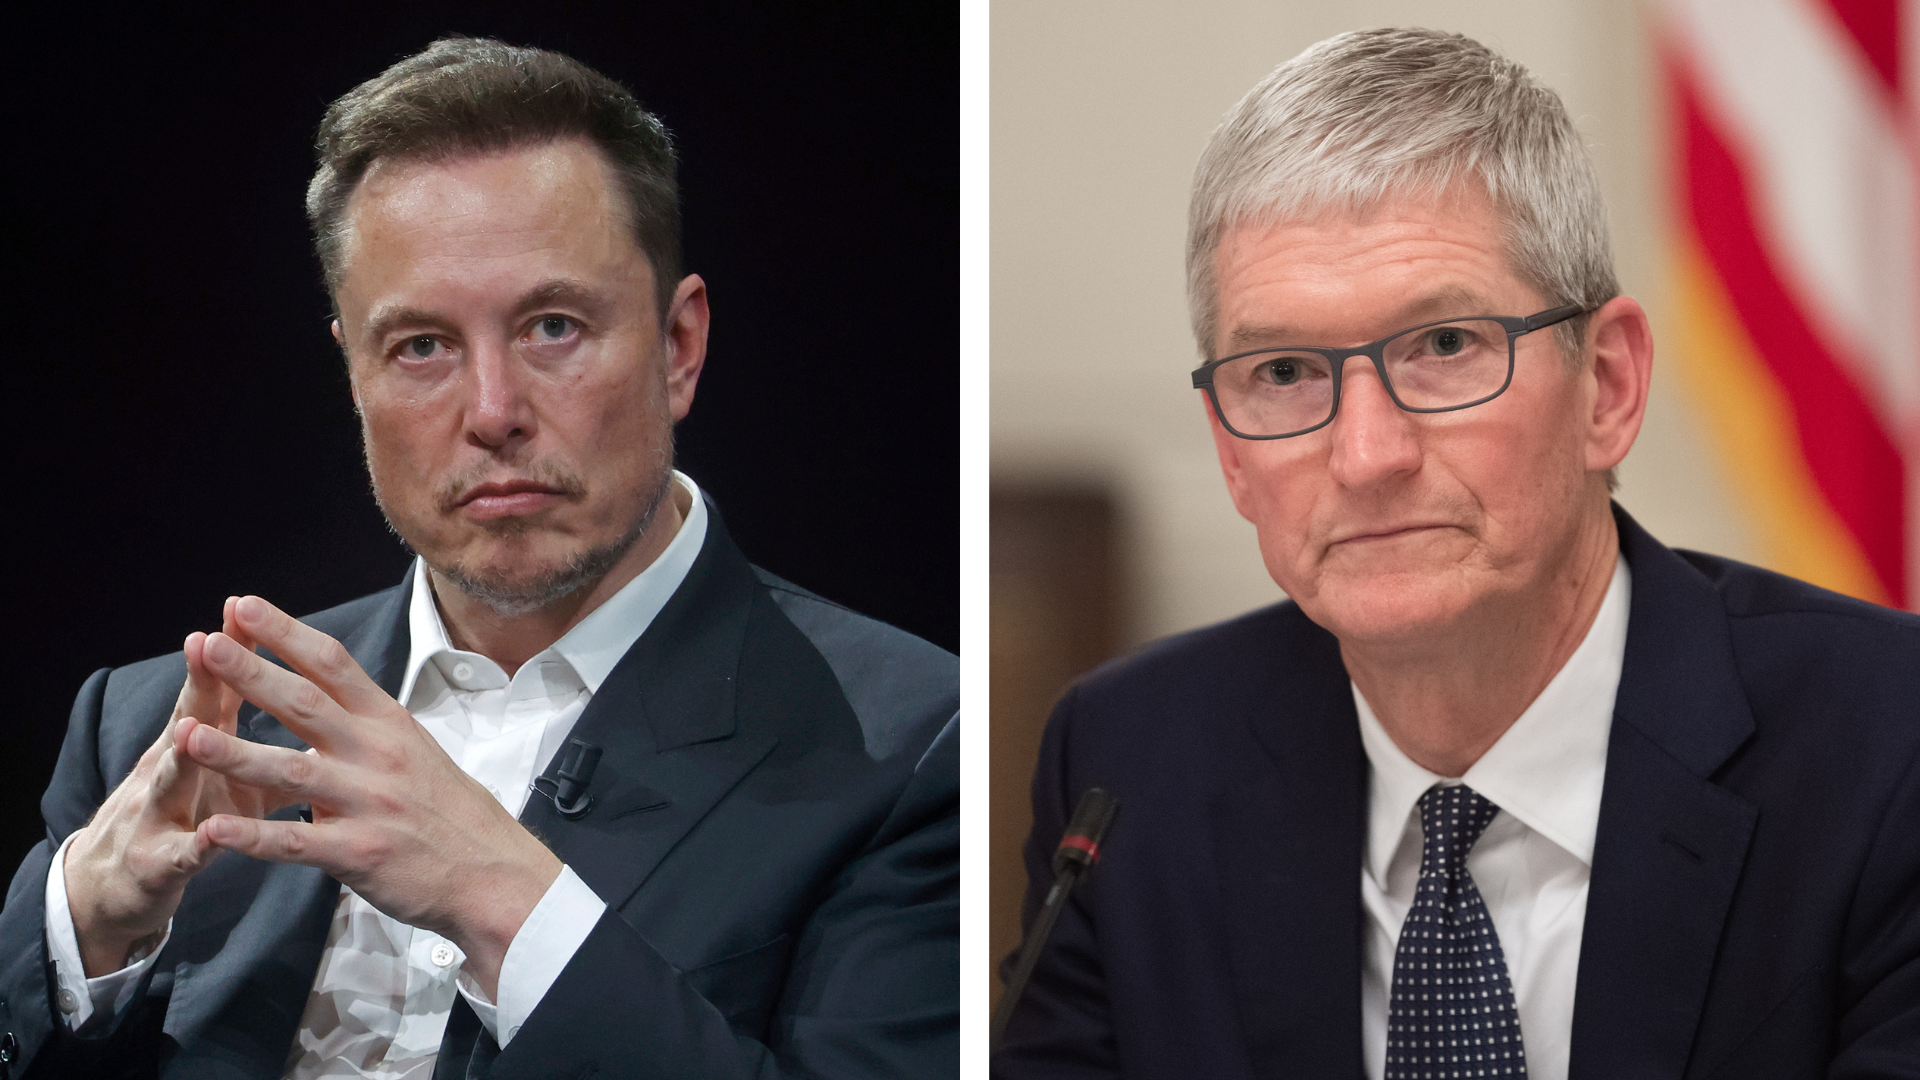 Elon Musk on the left, Tim Cook on the right